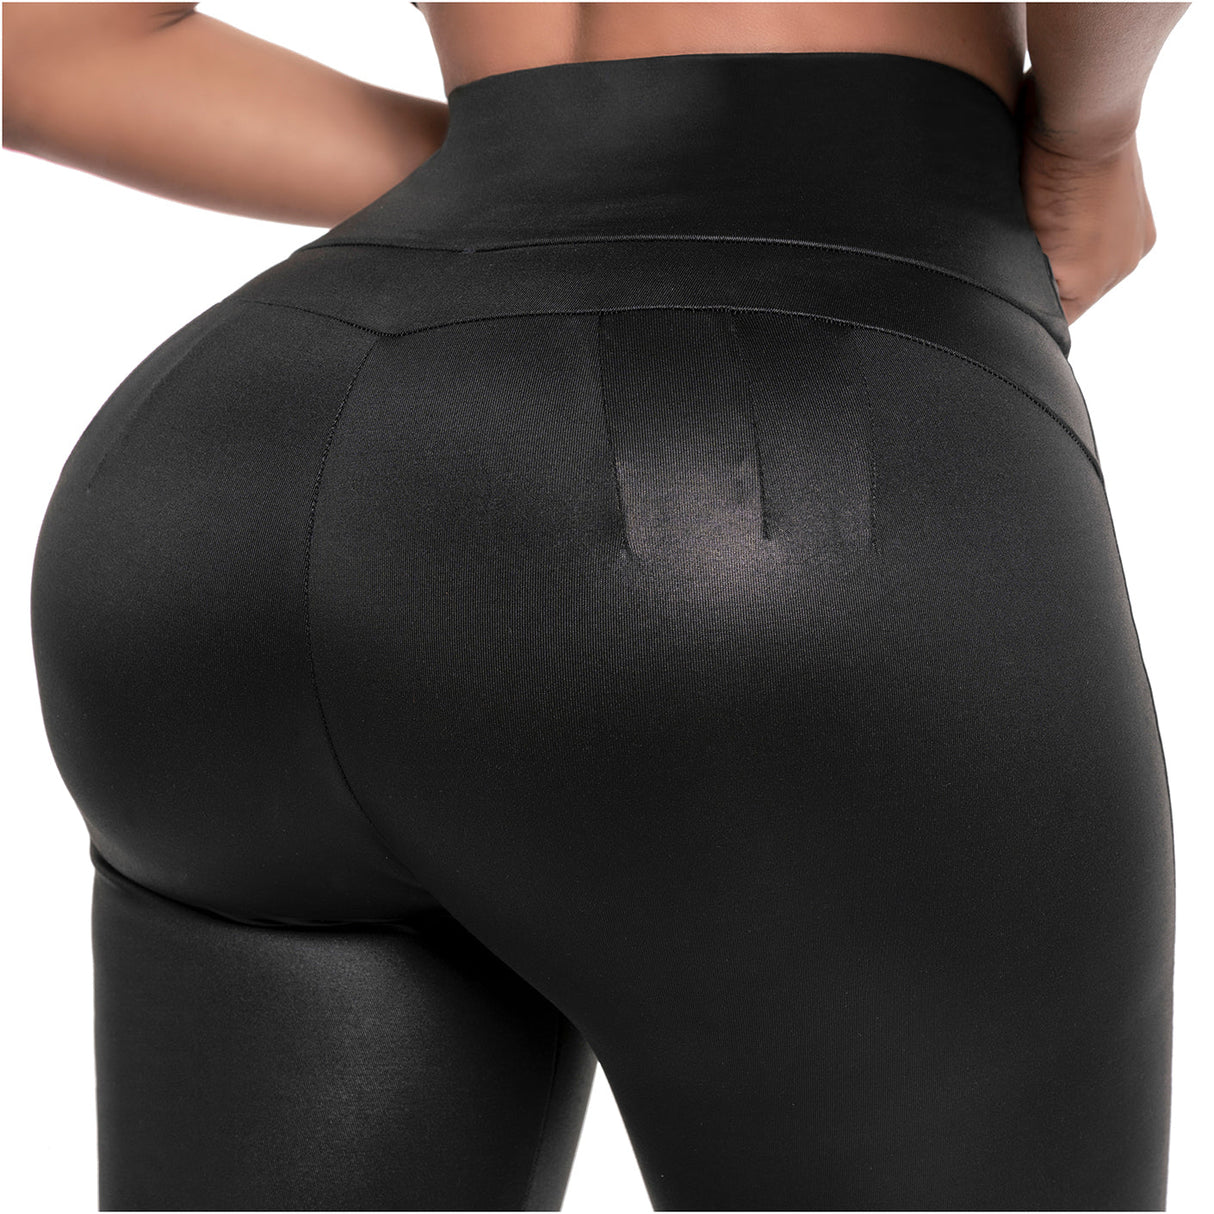 Fajas Colombianas Shaperwear Yoga Gym Sports High Compression Powernet  Front Zipper Better Comfort Butt Lifter Pants 231220 From Zhi07, $56.86